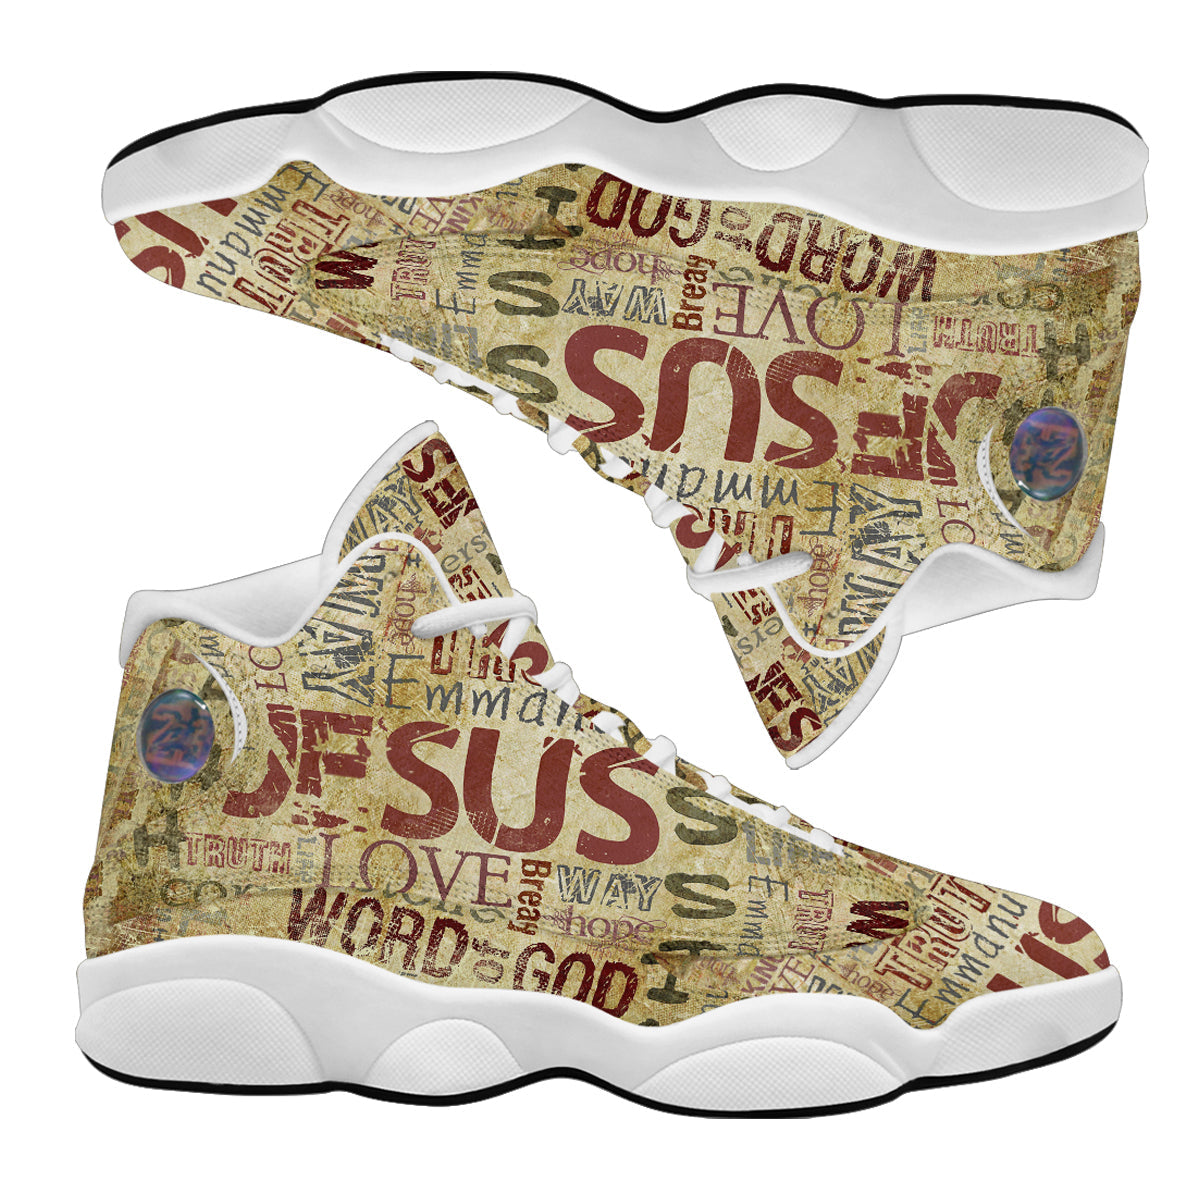 Religious God's Word Jesus Basketball Shoes For Men Women - Christian Shoes - Jesus Shoes - Unisex Basketball Shoes